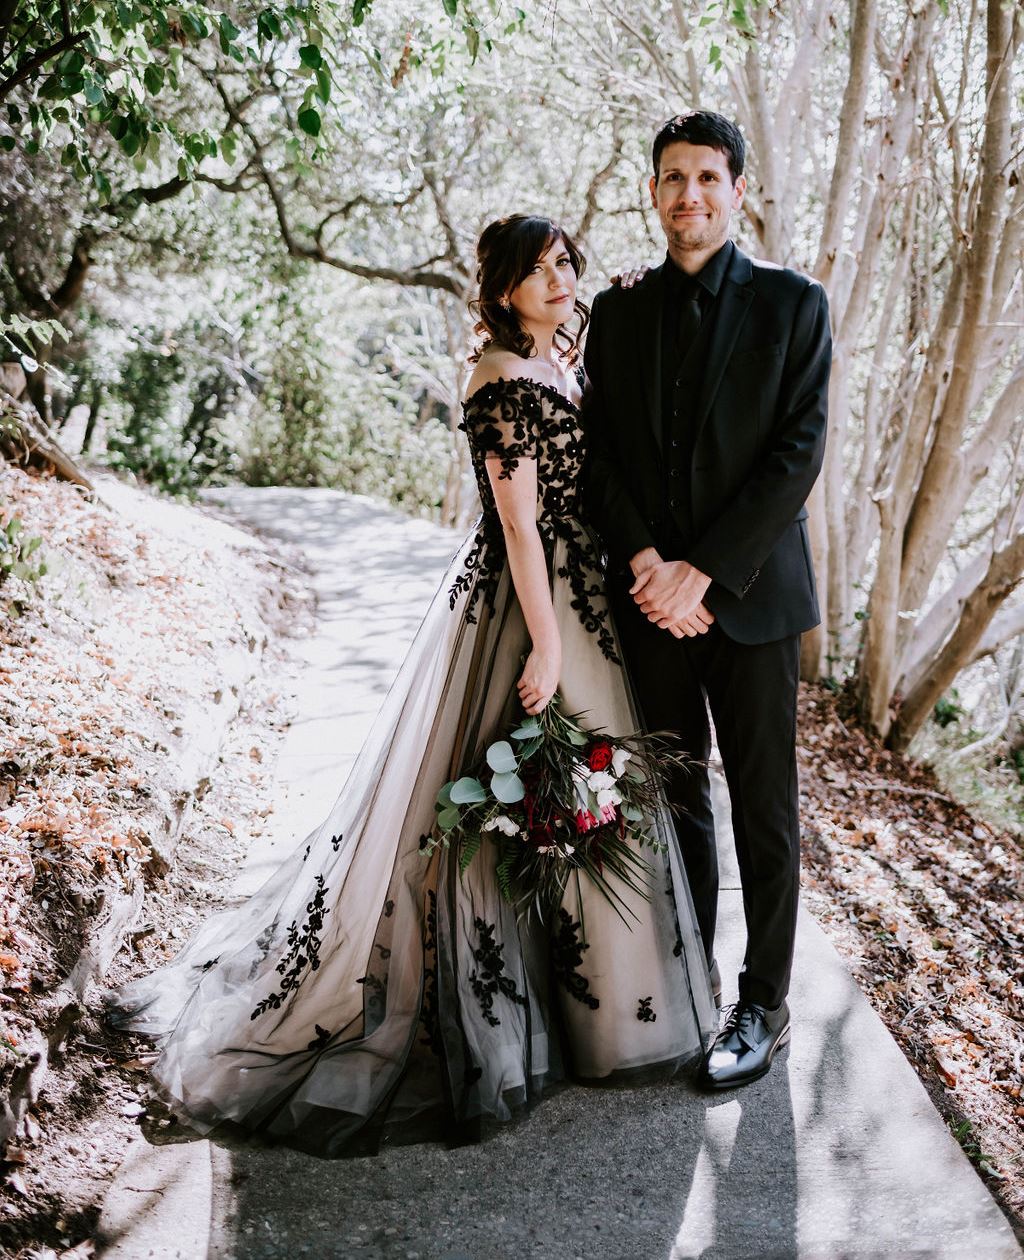 This couple went for an elegant and chic Gothic wedding, with no too traditional things